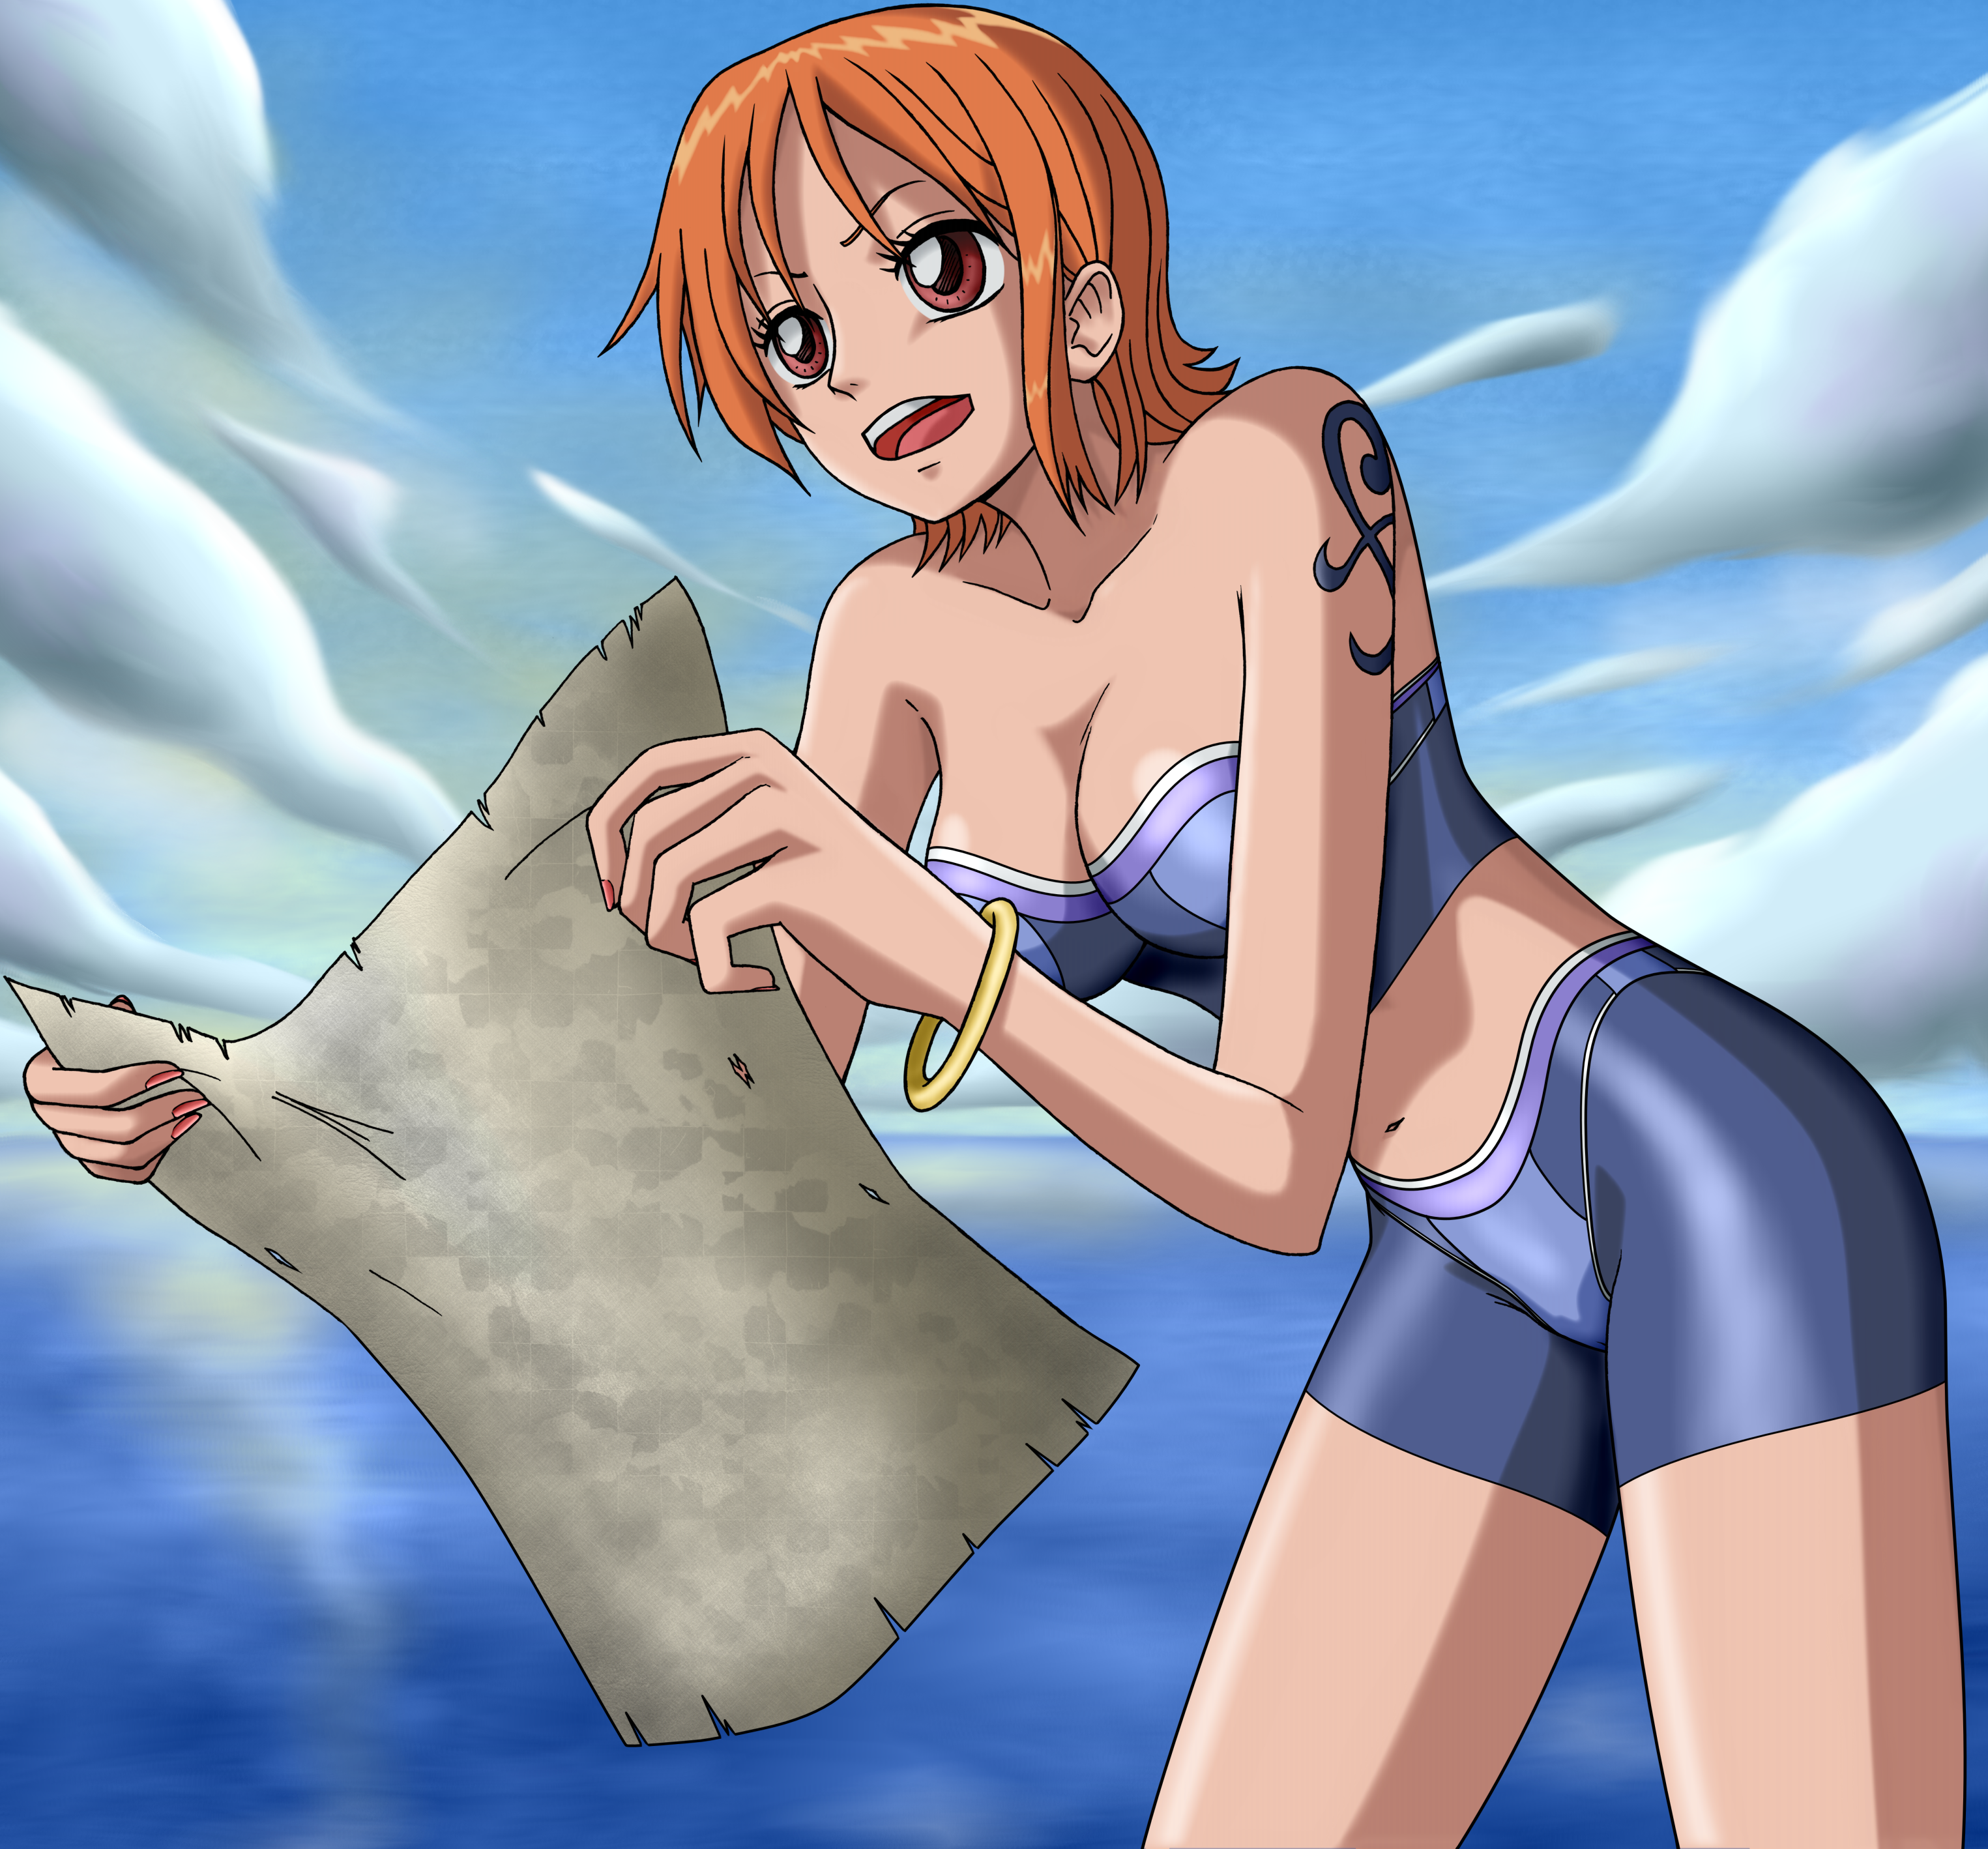 nami_holding_a_map___one_piece_by_kaendd